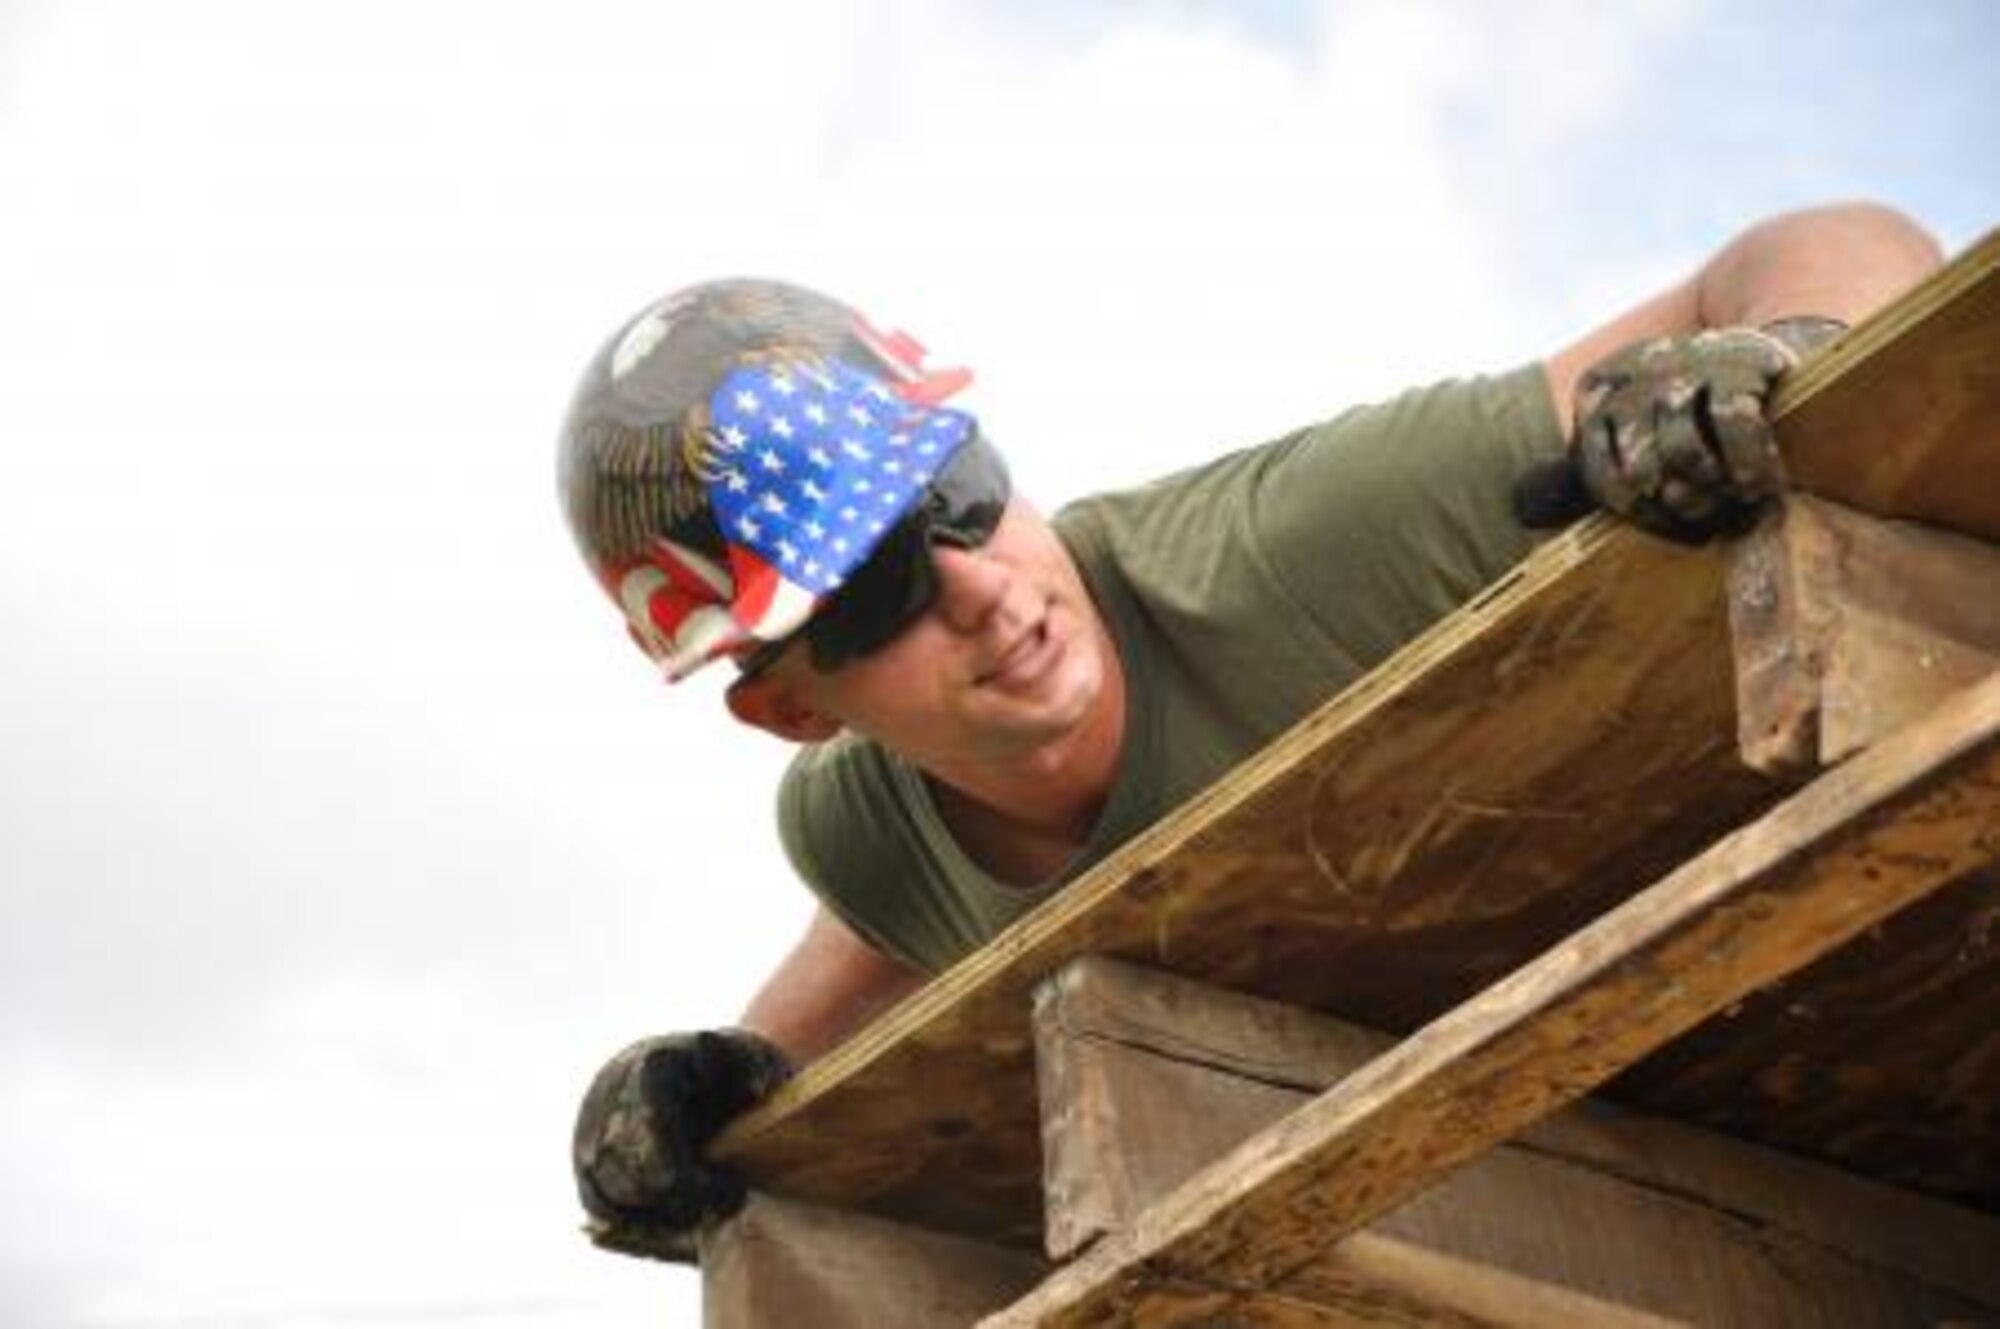 U.S. Marine Corps Sgt. Maximilian Beres, combat engineer from the Marine Wing Support Squadron 472, installs roof decking to repair a roof at Hattieville Government Pre-School June 4, 2013, as part of an exercise called New Horizons. Using excess building materials, the civil engineers plan to repair the leaky roof. Civil Engineers from both the U.S. and Belize are constructing various structures at schools throughout Belize as part of an exercise called New Horizons. Building these facilities will support further education for the children of the country and provide valuable training for U.S. and Belizean service members. (U.S. Air Force photo/Capt. Holly Hess)